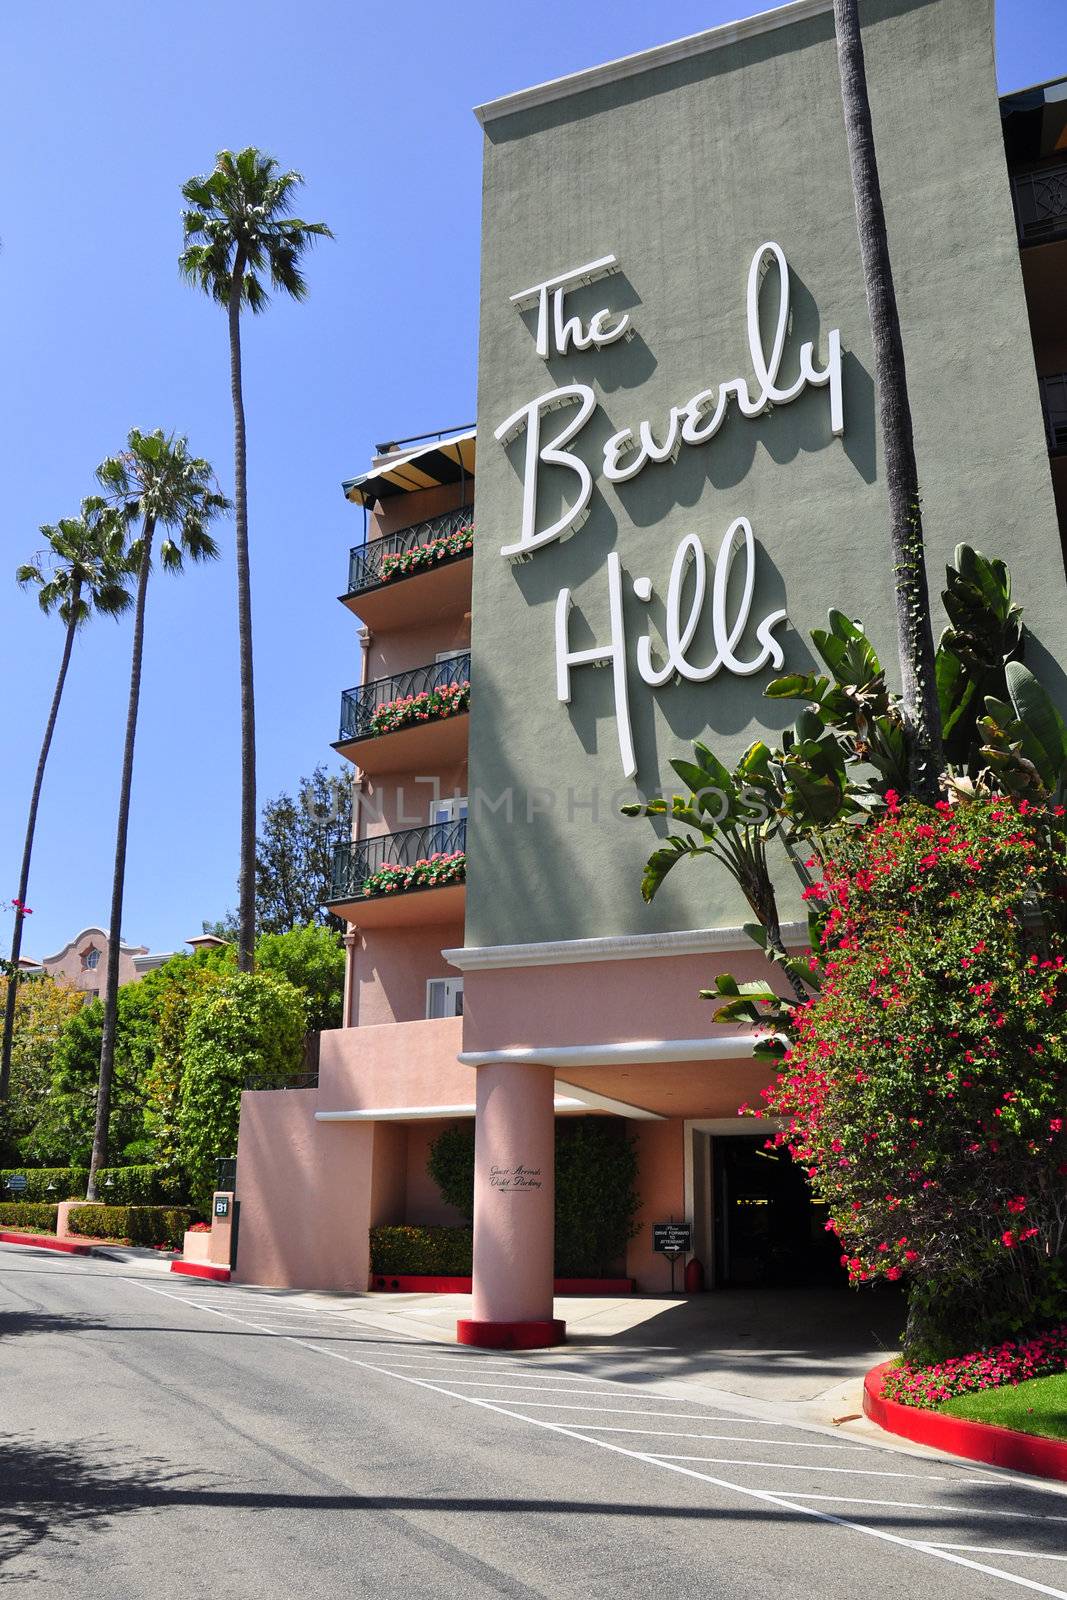 The Beverly Hills Hotel by ruigsantos